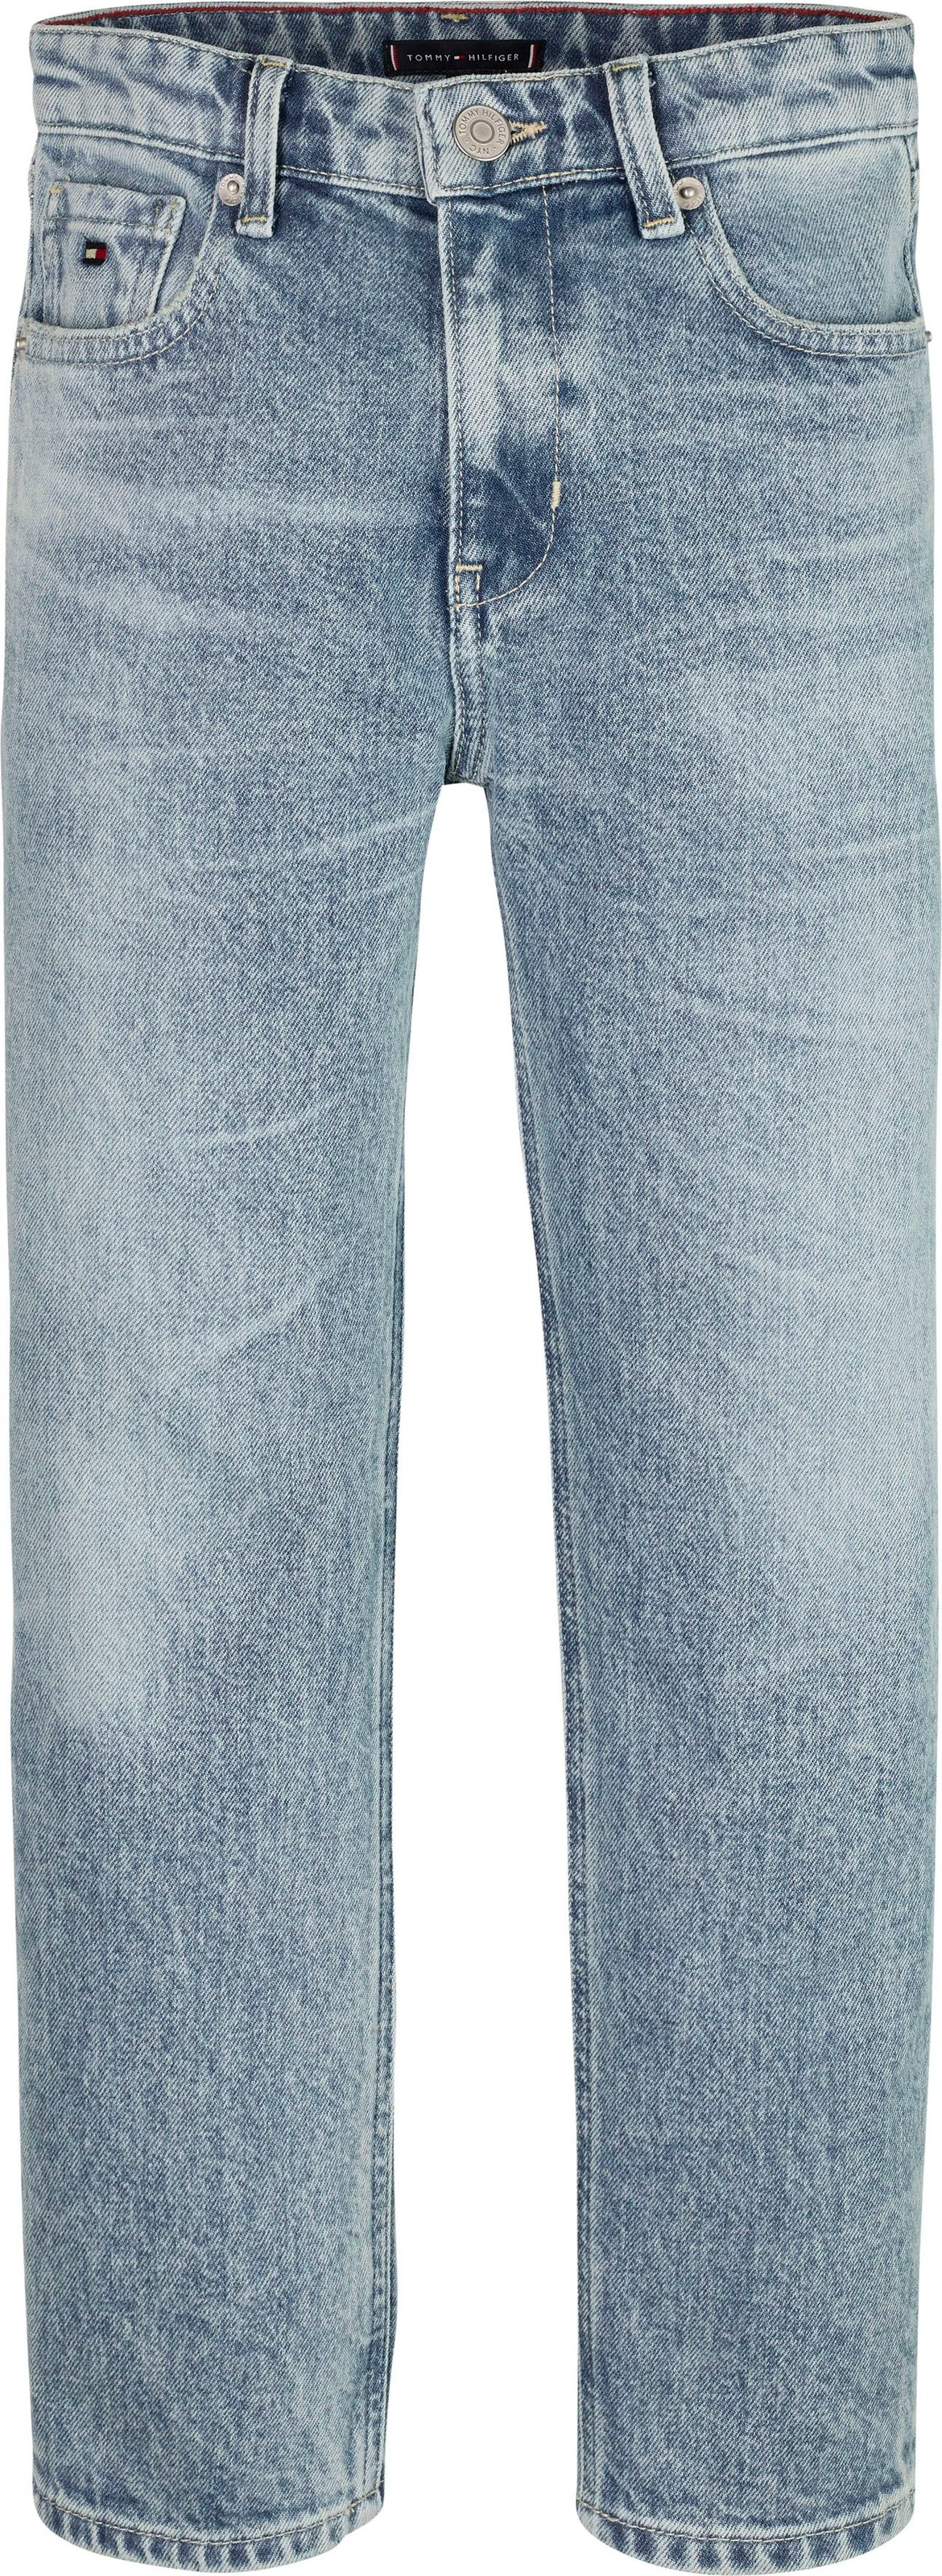 Tommy Hilfiger Bequeme Jeans »SKATER JEAN RECYCLED«, im 5-Pocket-Style  kaufen